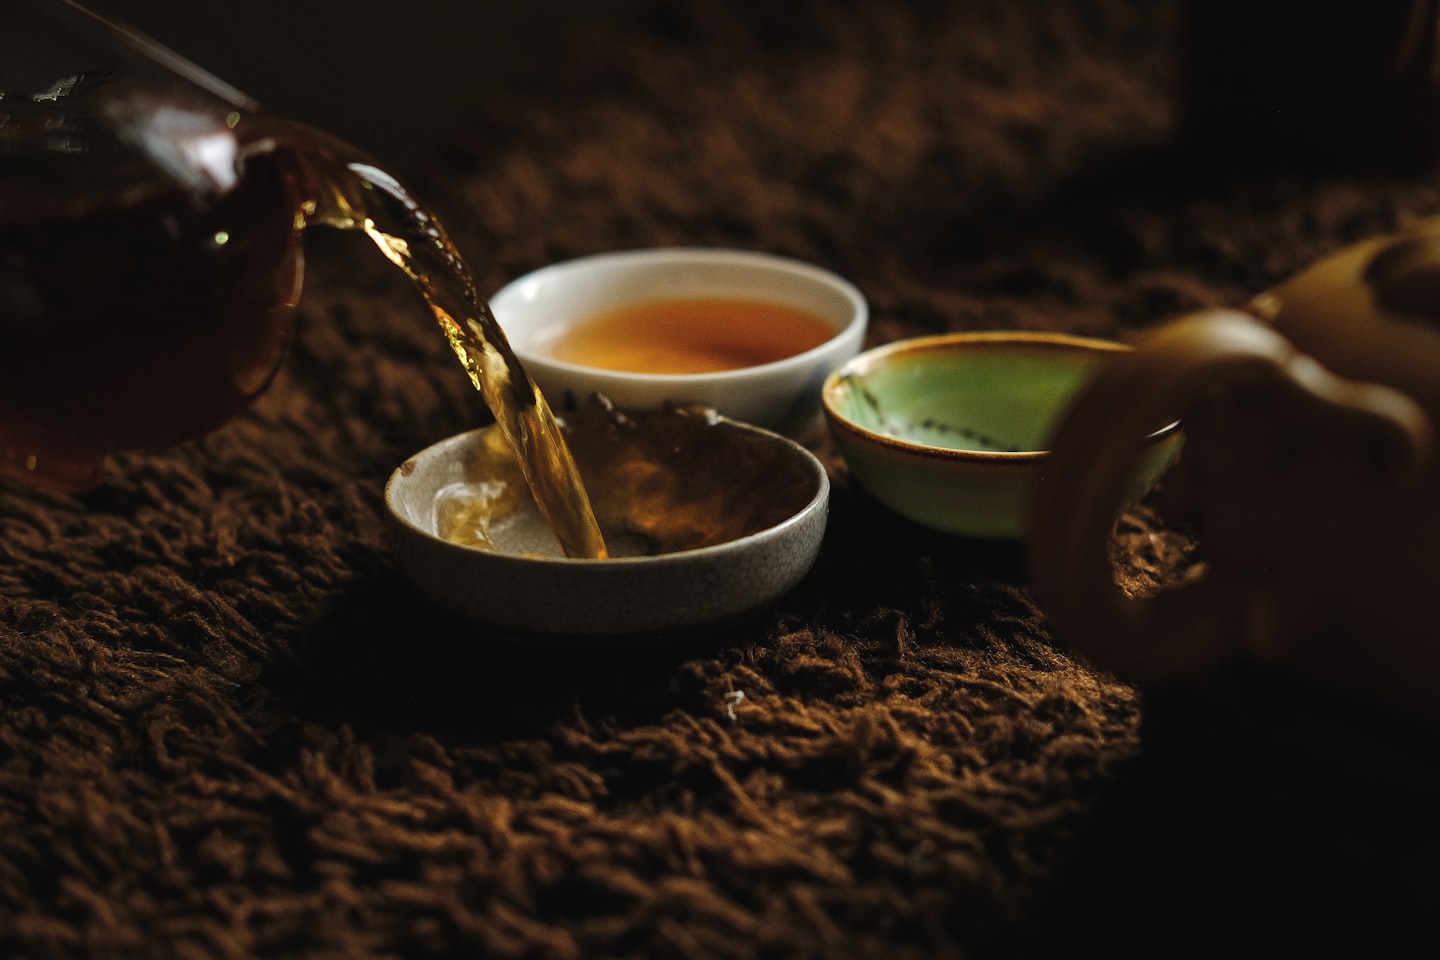 Cover Image for Fine Tea Tasting (members and +1s only)